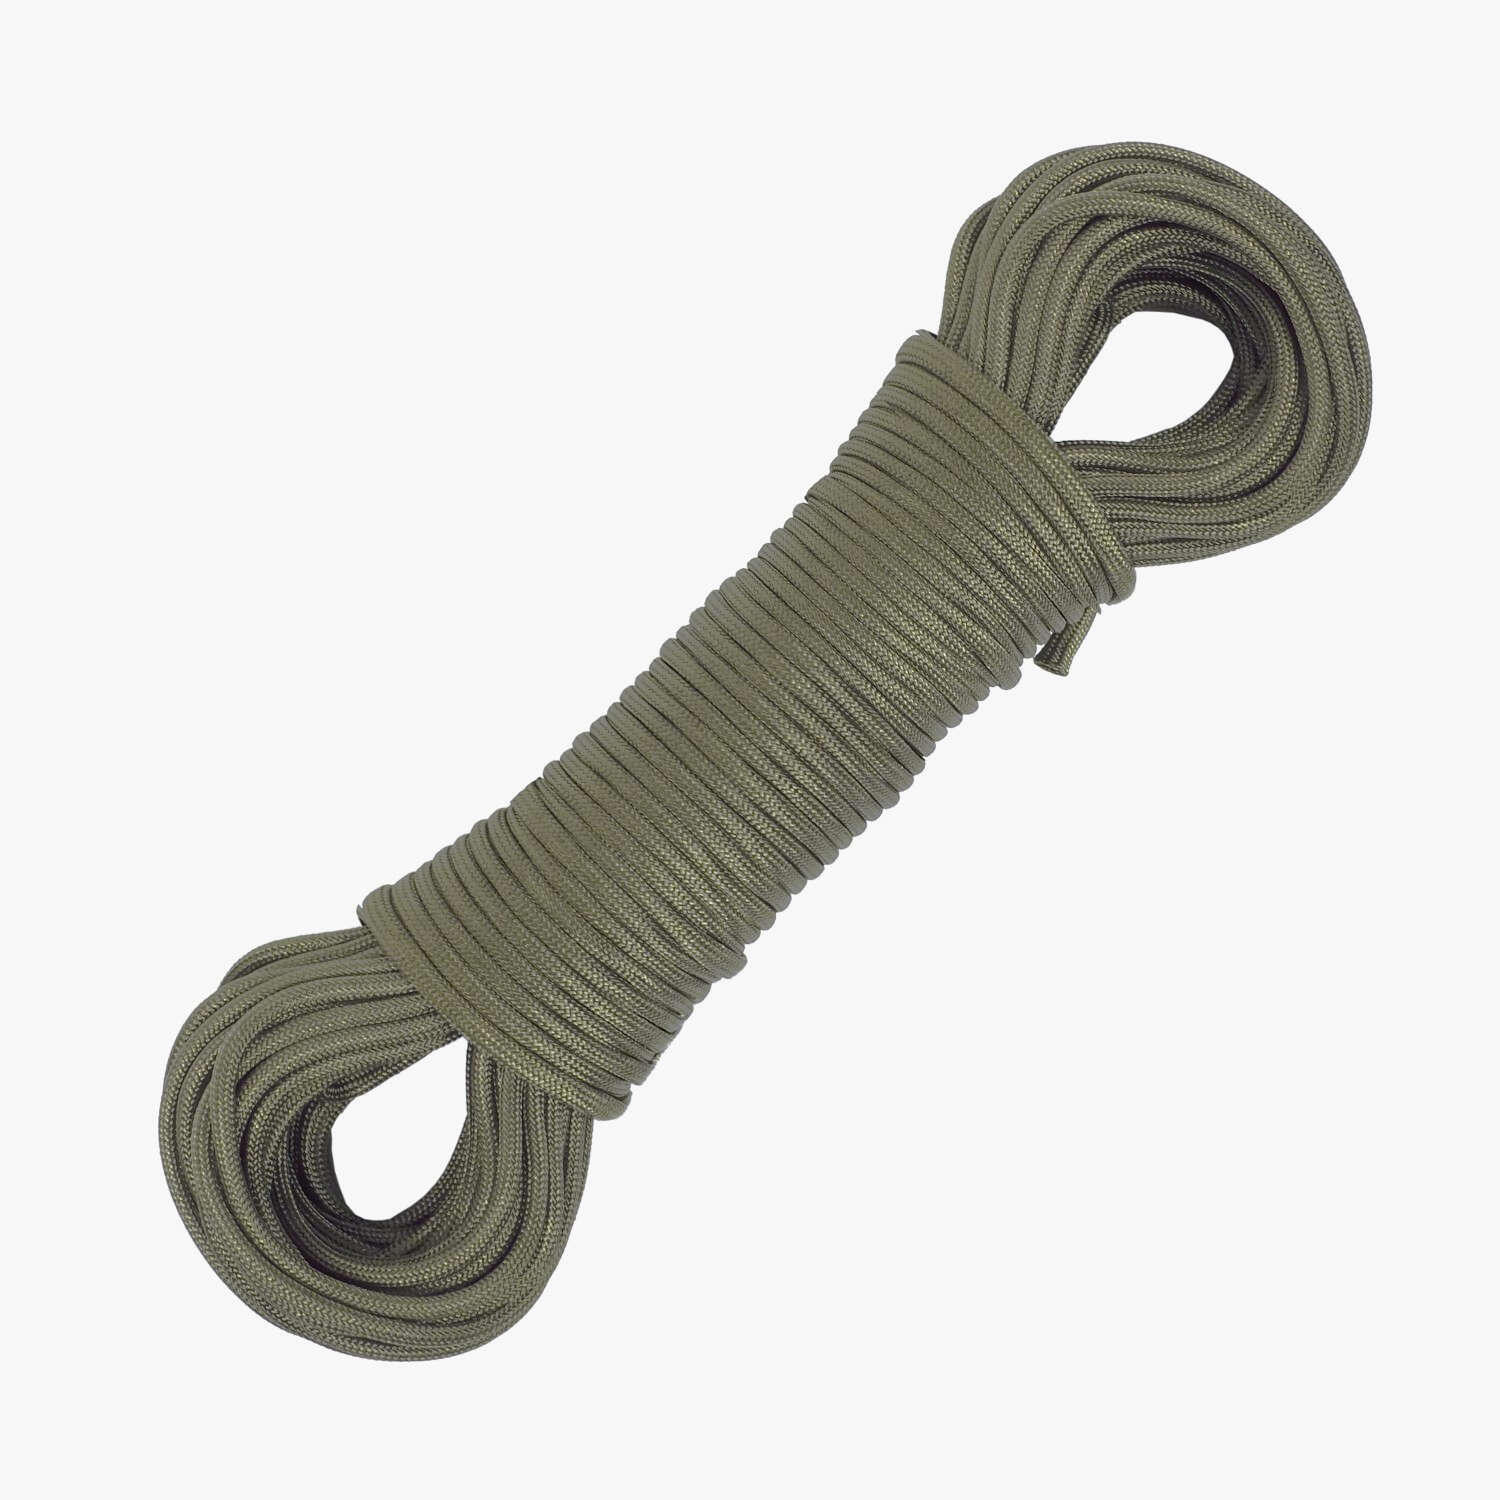 Tent Guy Ropes, Lines & Tensioners for Camping